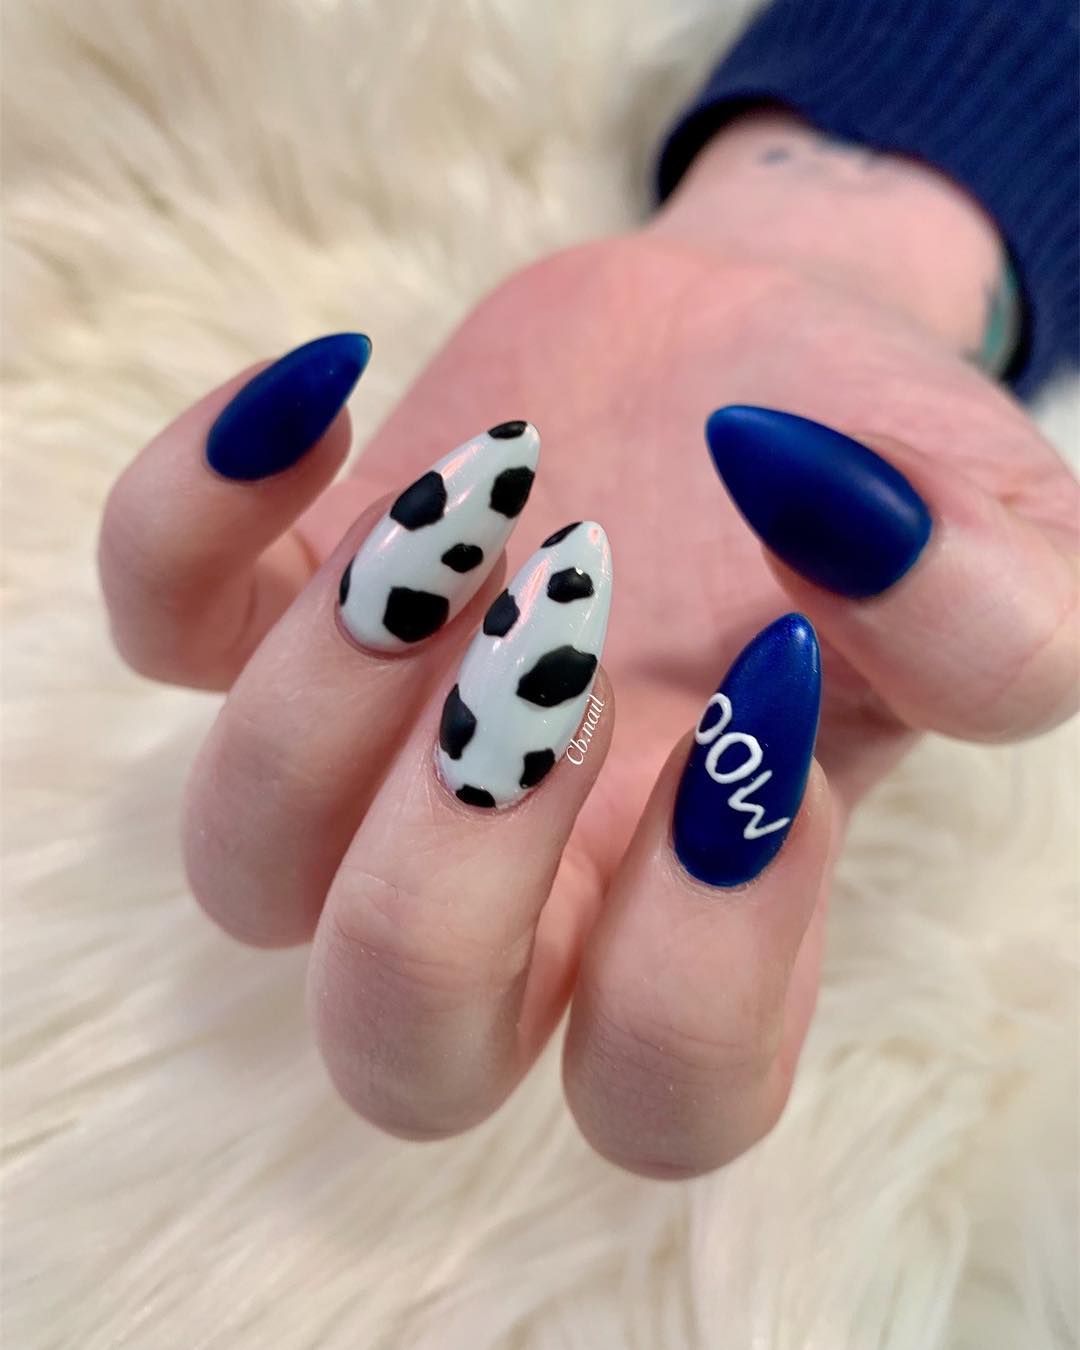 Royal Blue Nail Color with Exceptional Cow Design